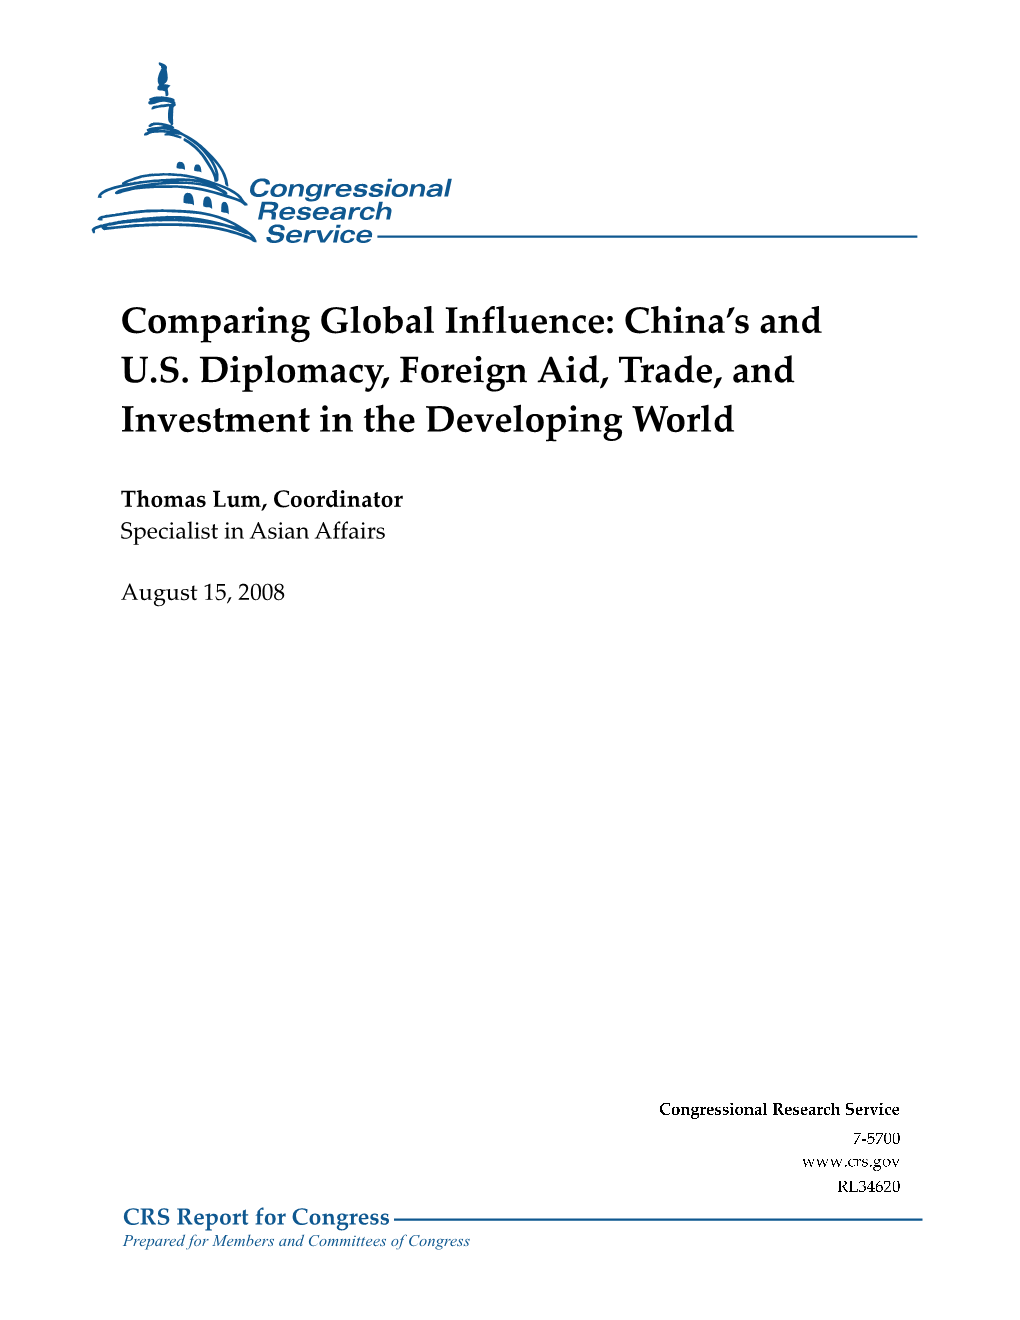 China's and US Diplomacy, Foreign Aid, Trade, and Investment in the Developing World